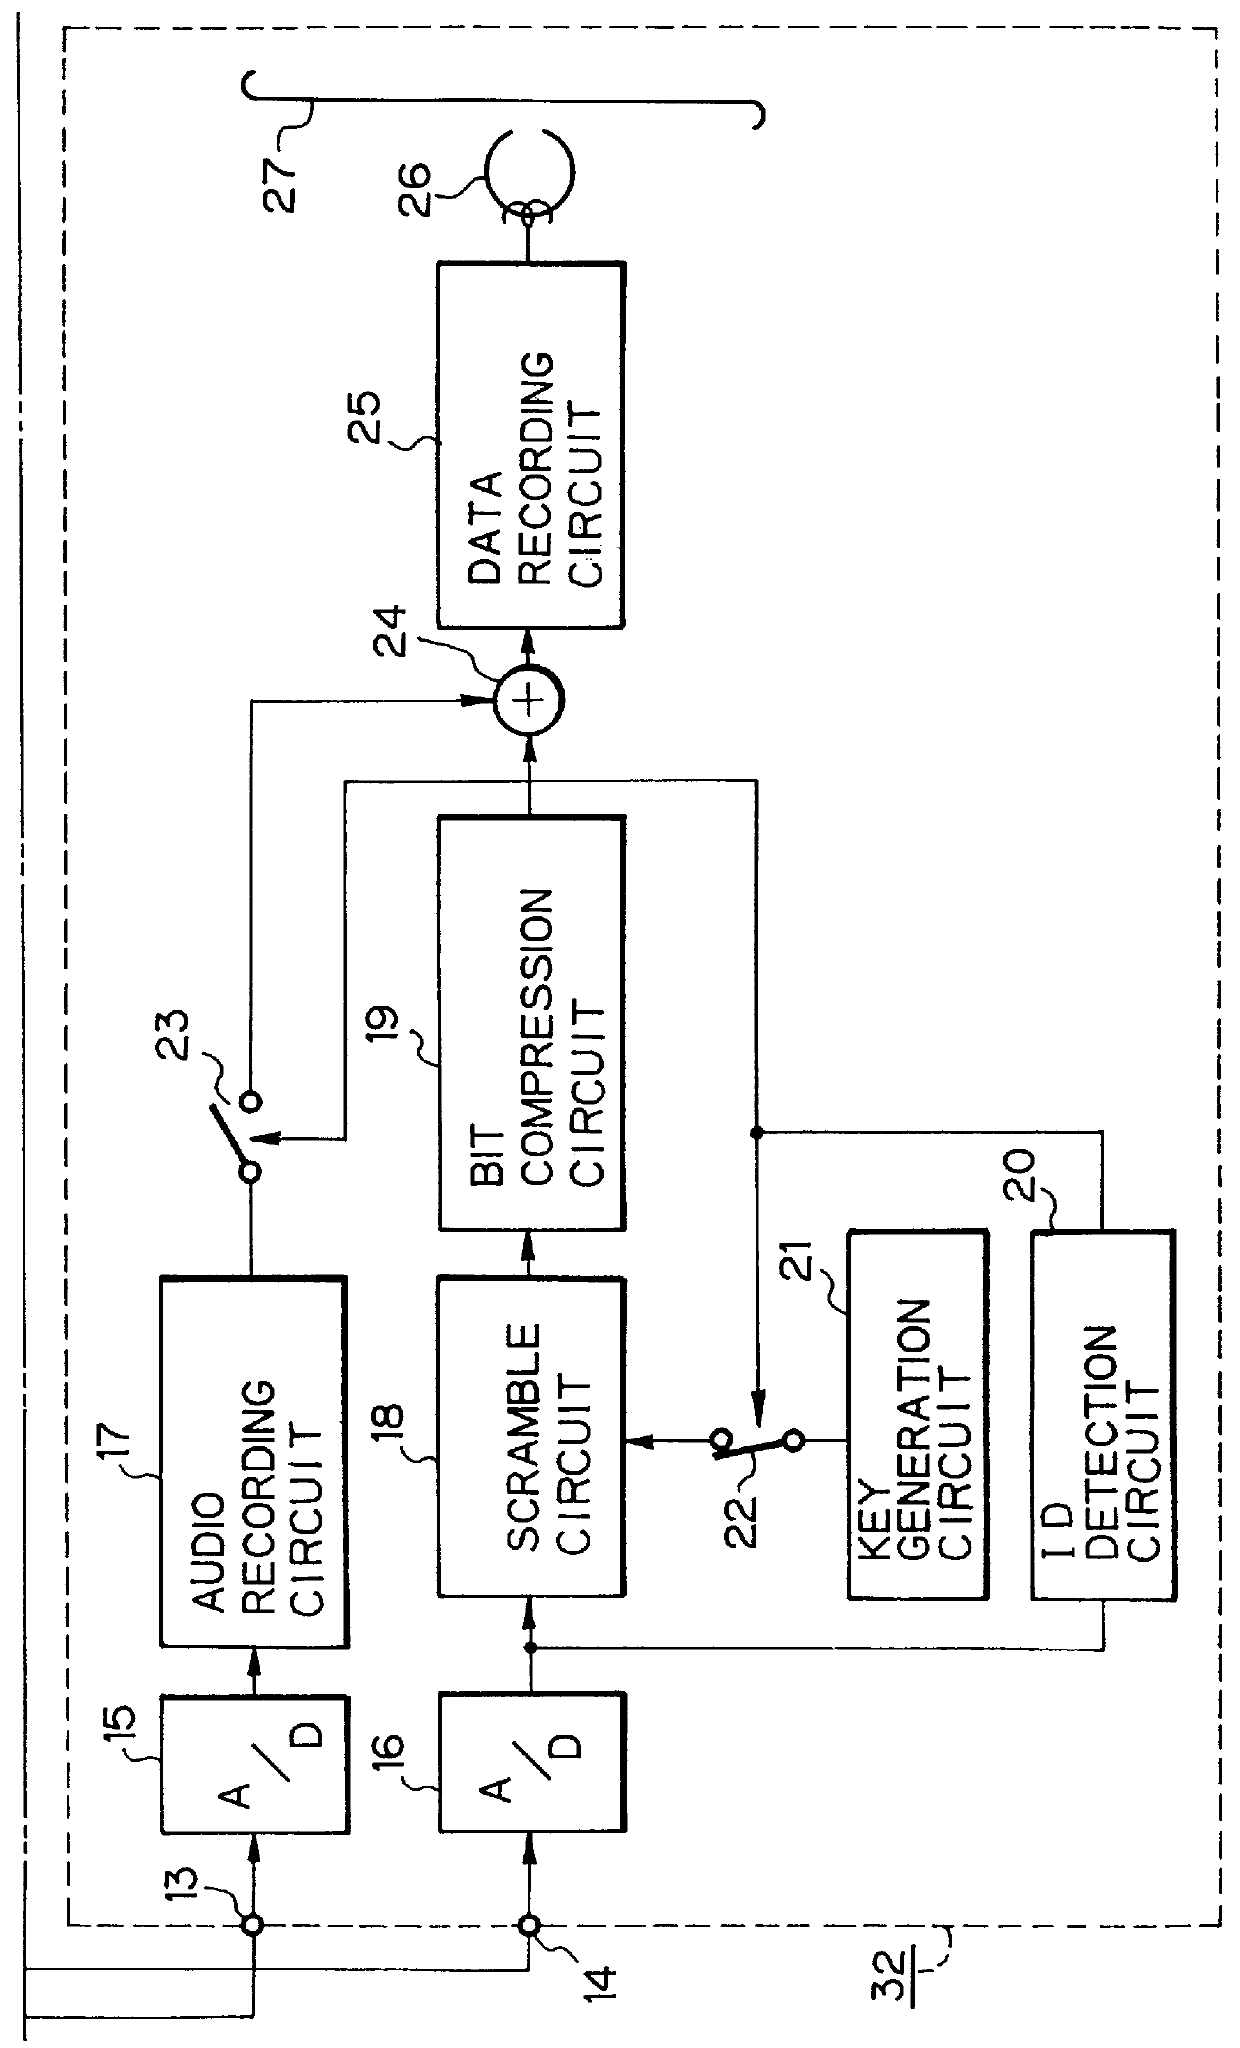 Apparatus and method for preventing unauthorized copying of video signals